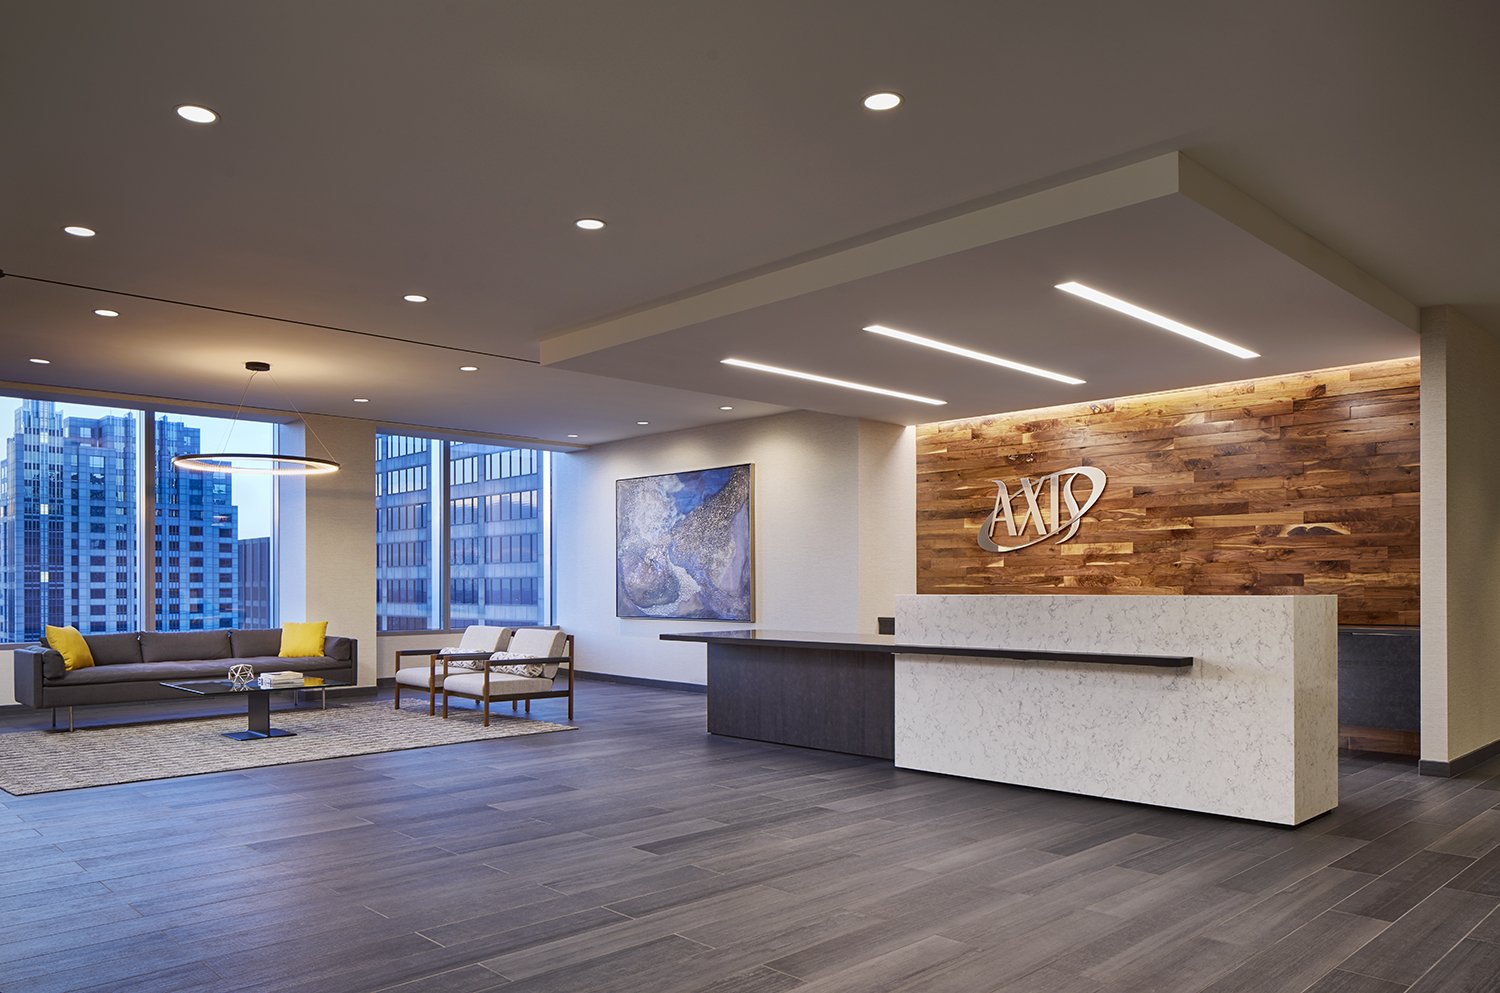 axis office space design looks modern